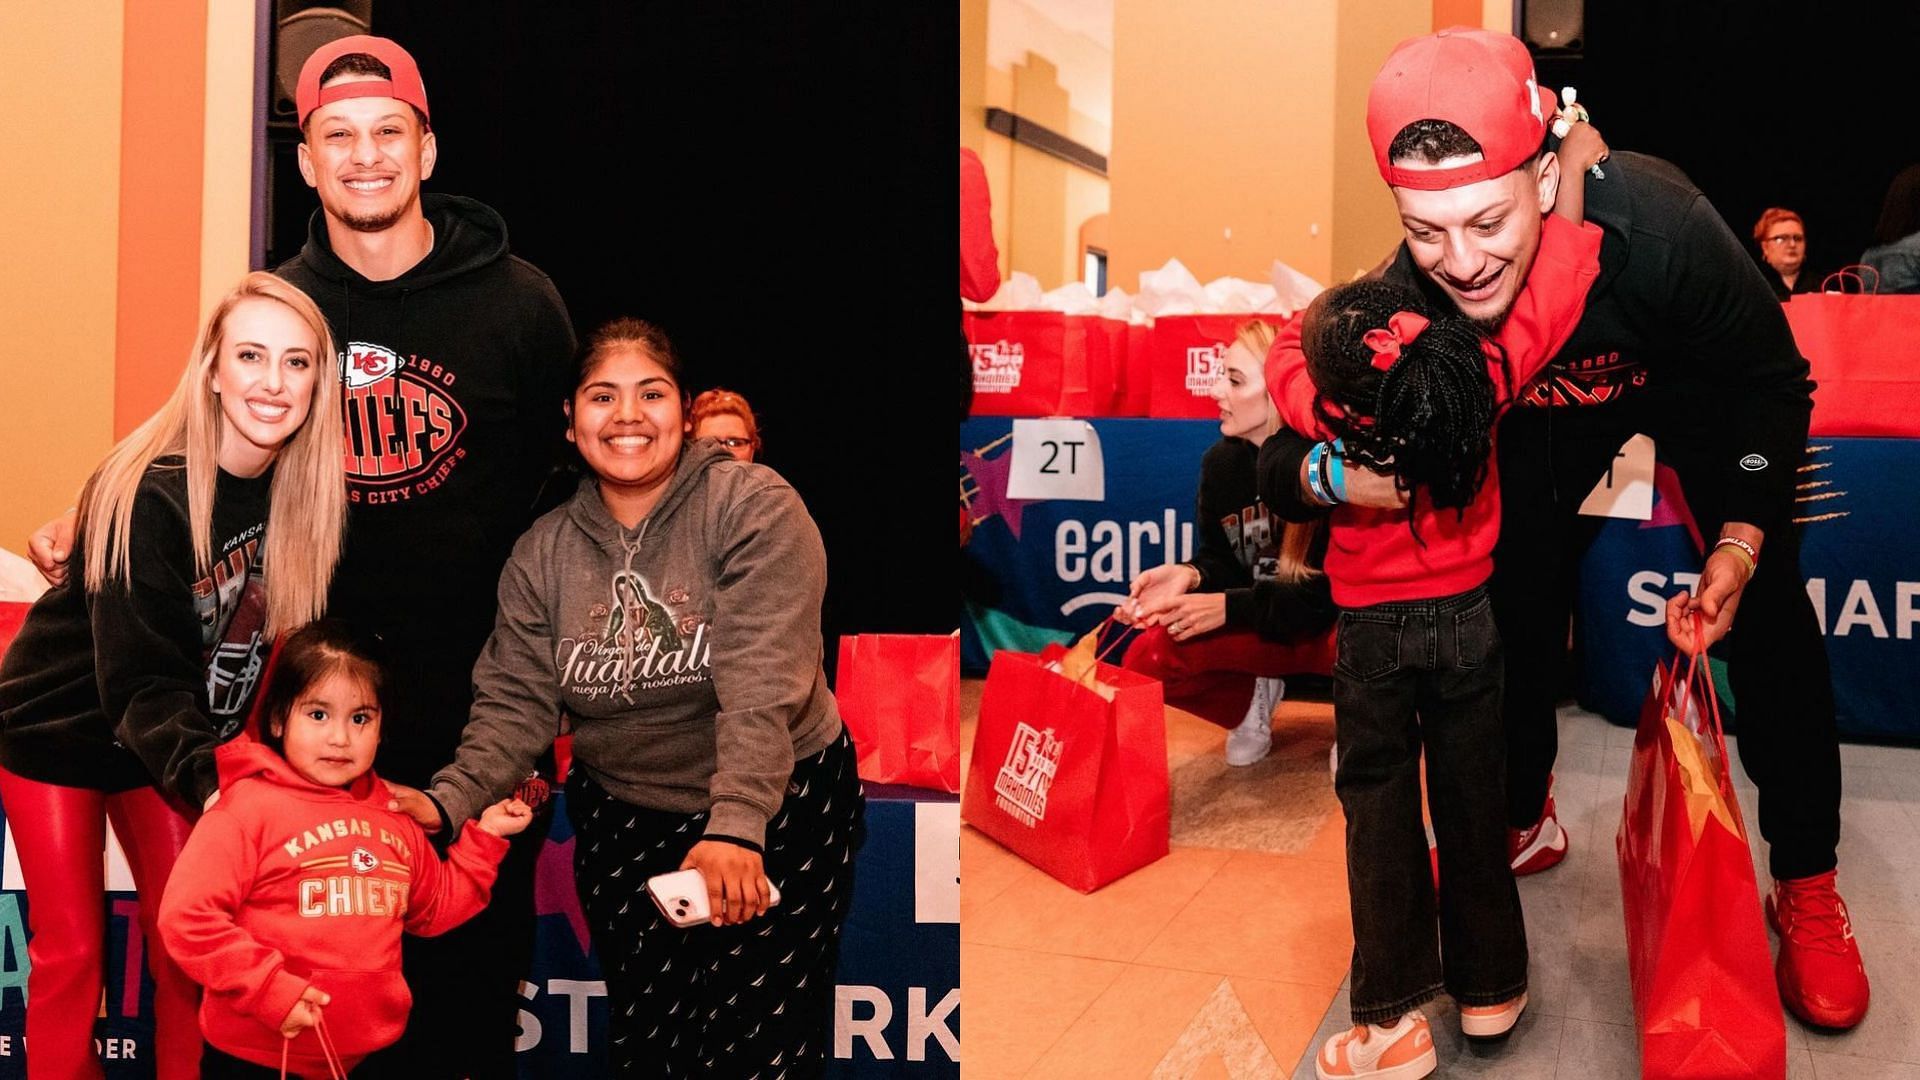 Brittany and Patrick Mahomes donated clothes and supplies in cooperation with Early Start KC. (Image credit: @15andmahomies on Instagram)